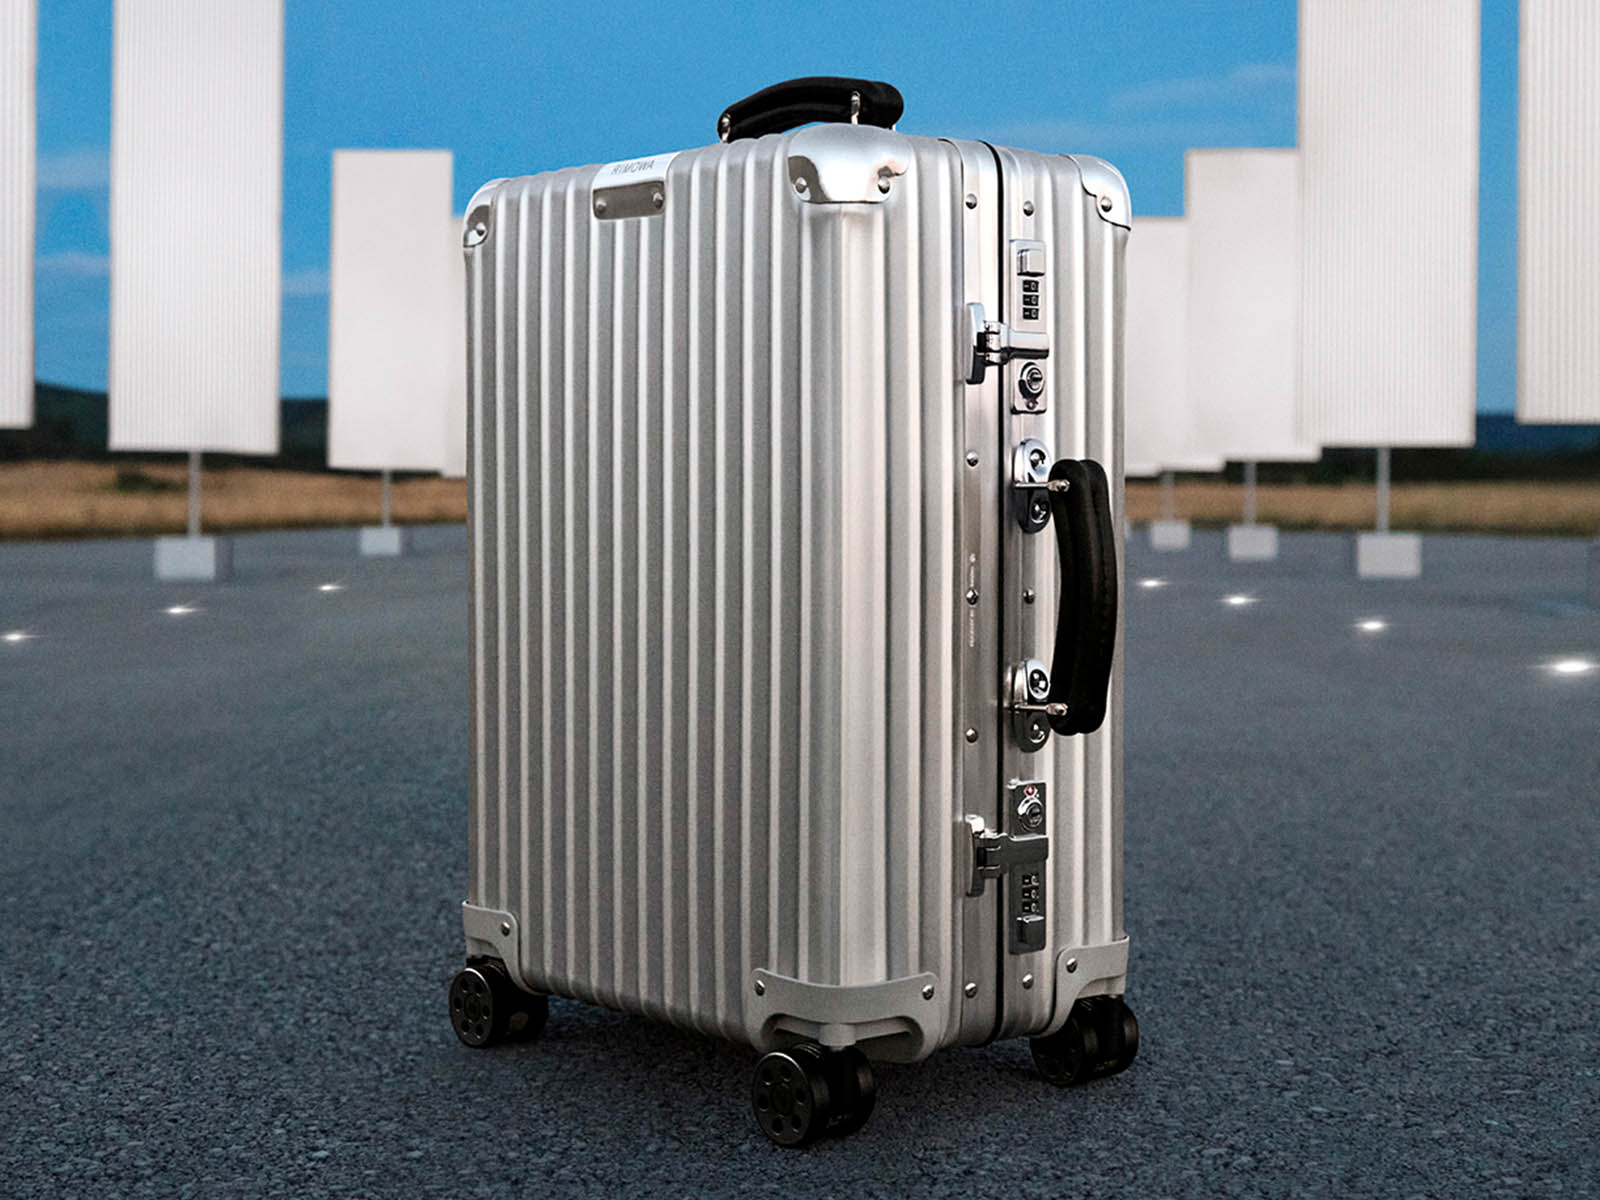 RIMOWA elevates its classic suitcase in its latest campaign